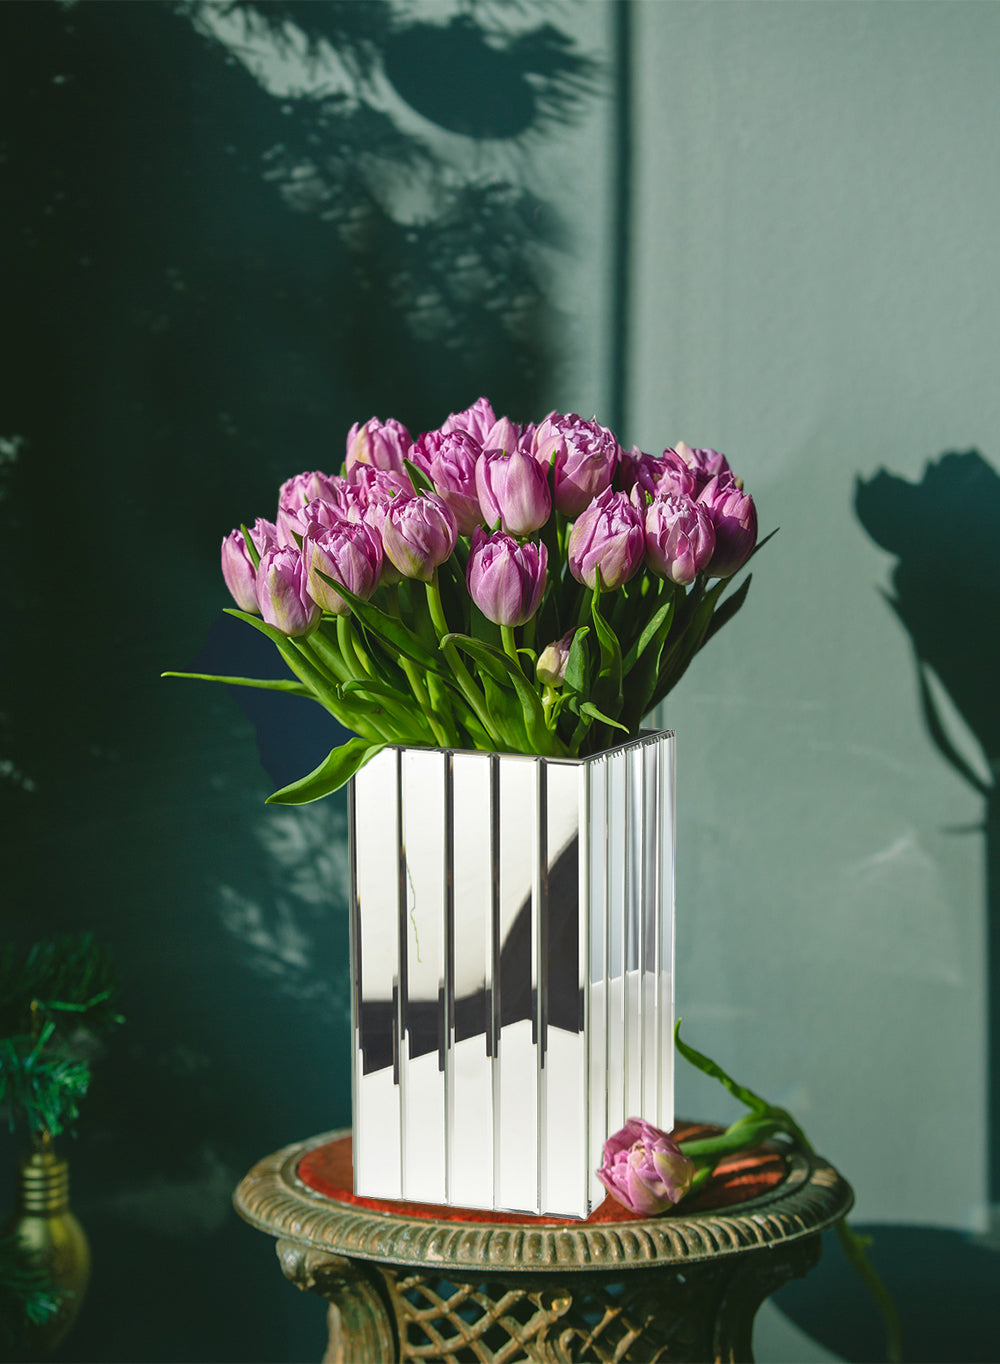 Serene Spaces Living Gatsby Mirror Strip Cube Vase – Art Deco Inspired  Glass Vase with Mirror Finish, Available in 2 sizes